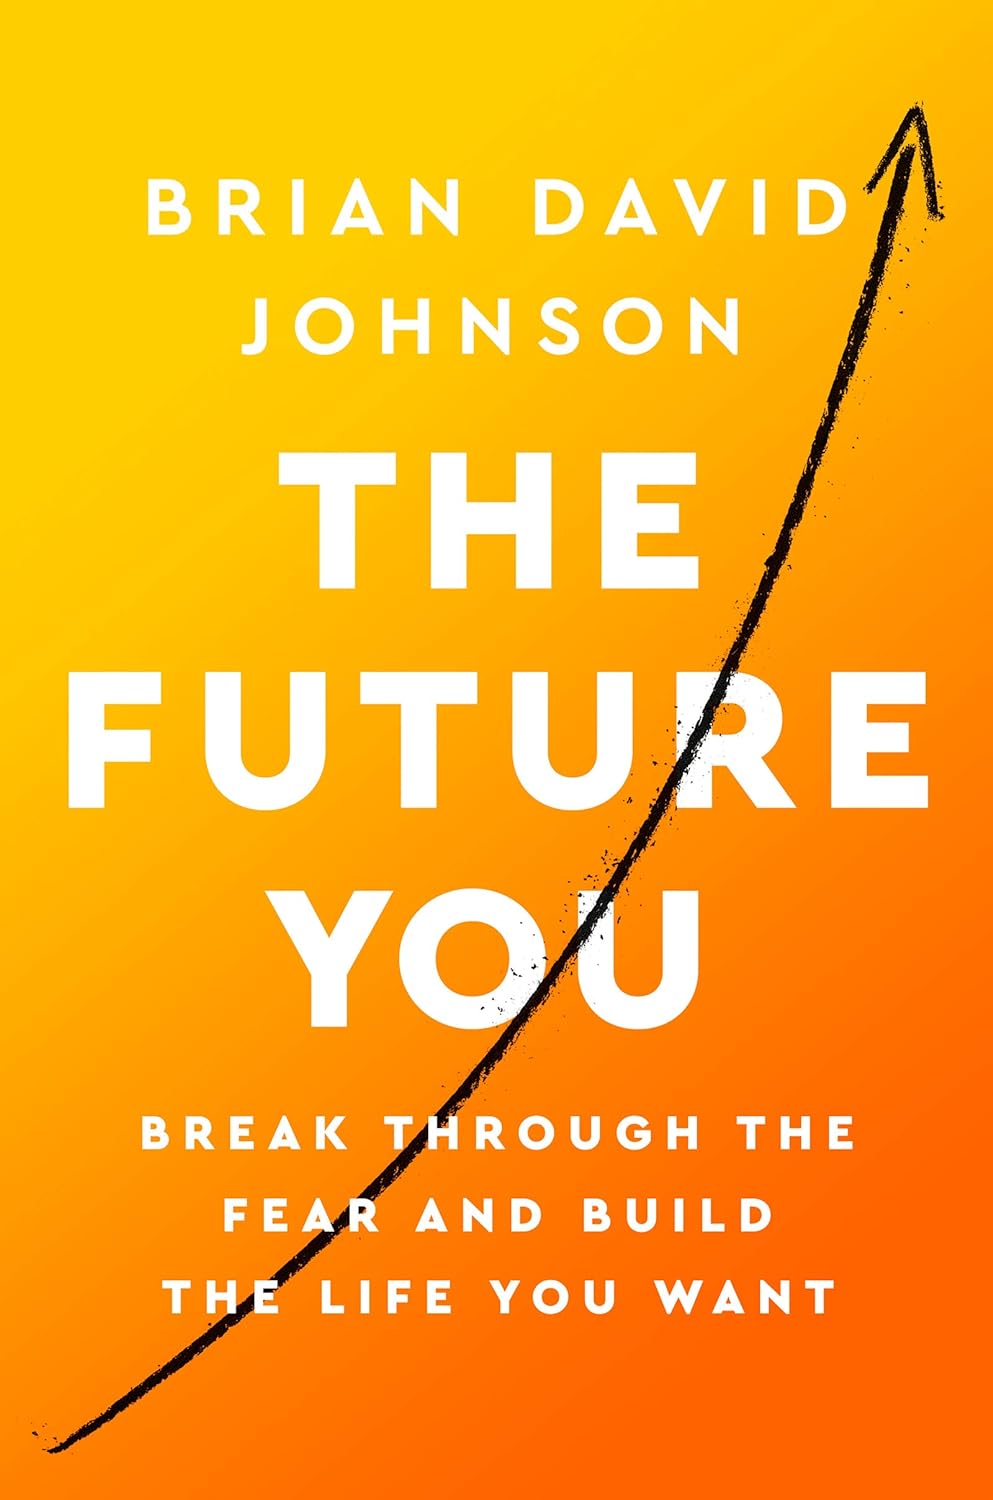 The Future You: Break Through the Fear and Build the Life You Want Hardcover – January 5, 2021